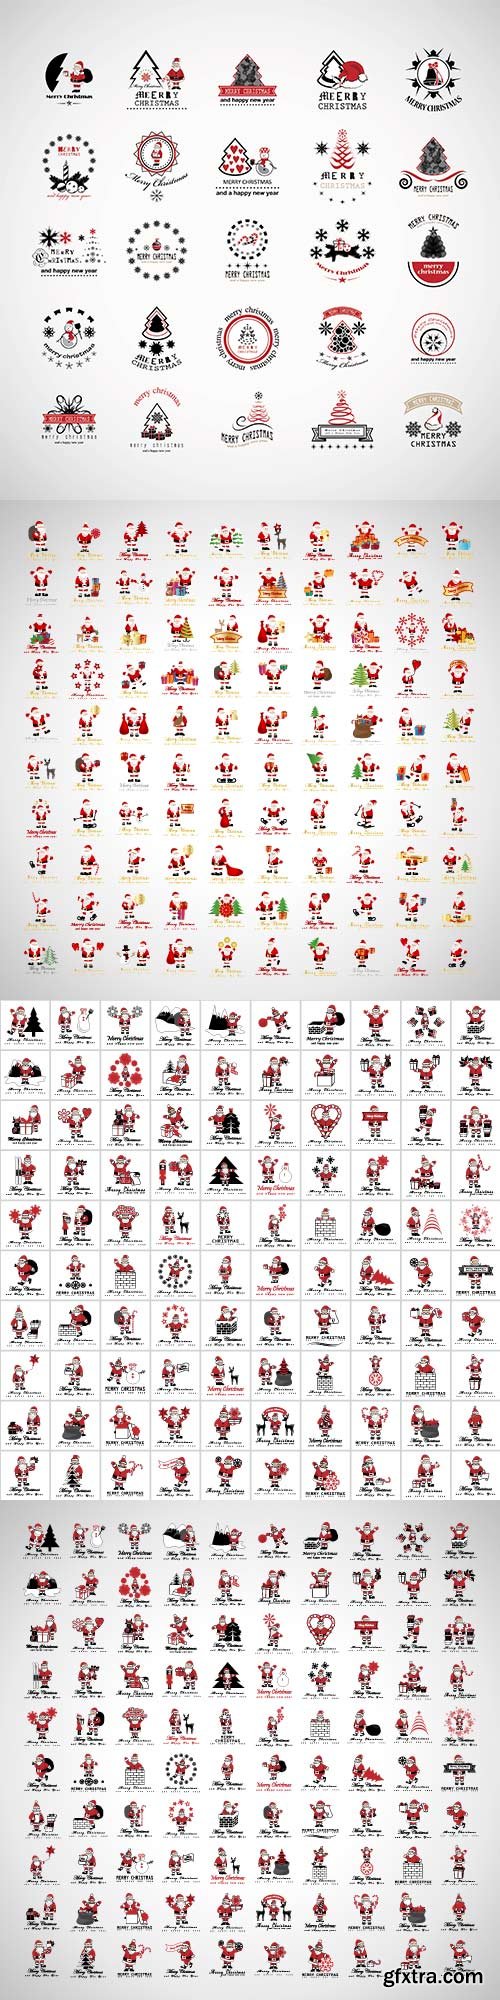 Santa Claus icons and Christmas elements set vector illustration